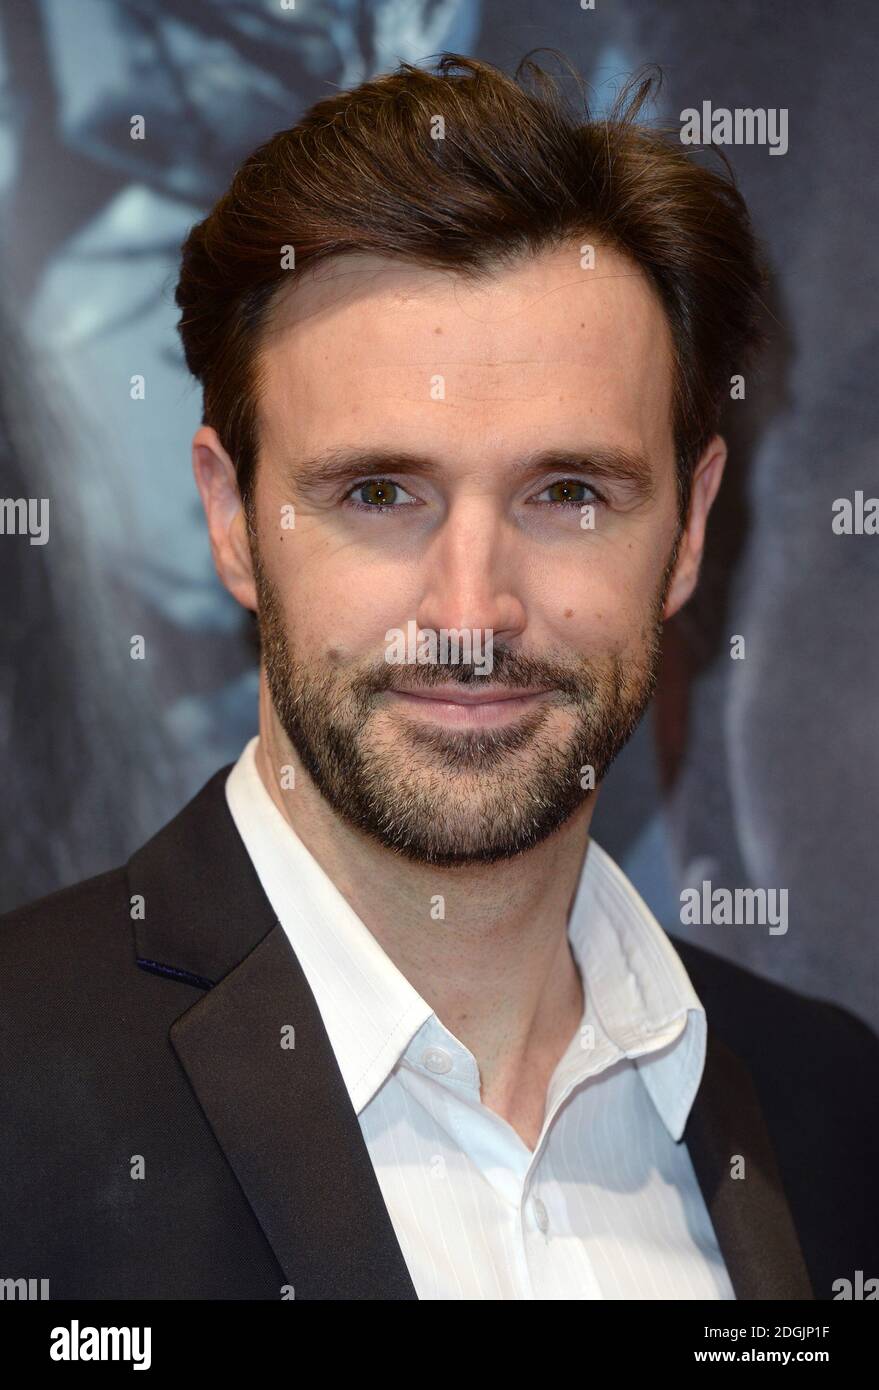 Michael Xavier arriving at the Into The Woods UK premiere, Curzon Mayfair Cinema, London. Stock Photo